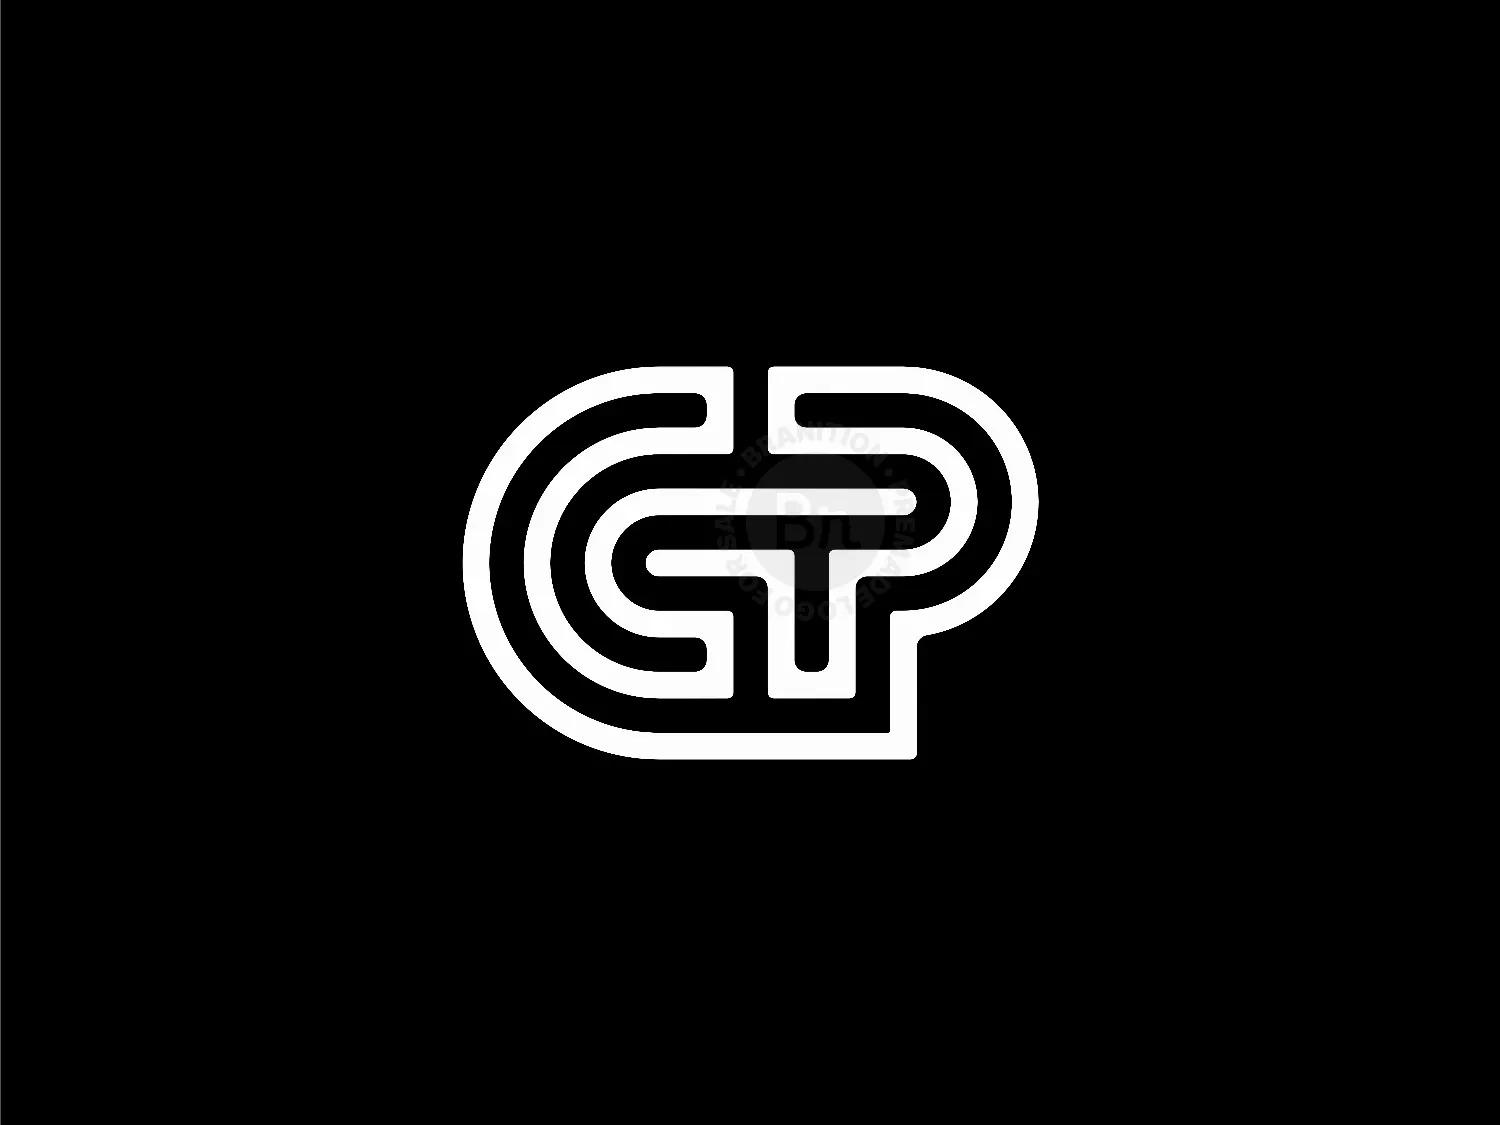 Free: letter cp gp logo design - nohat.cc